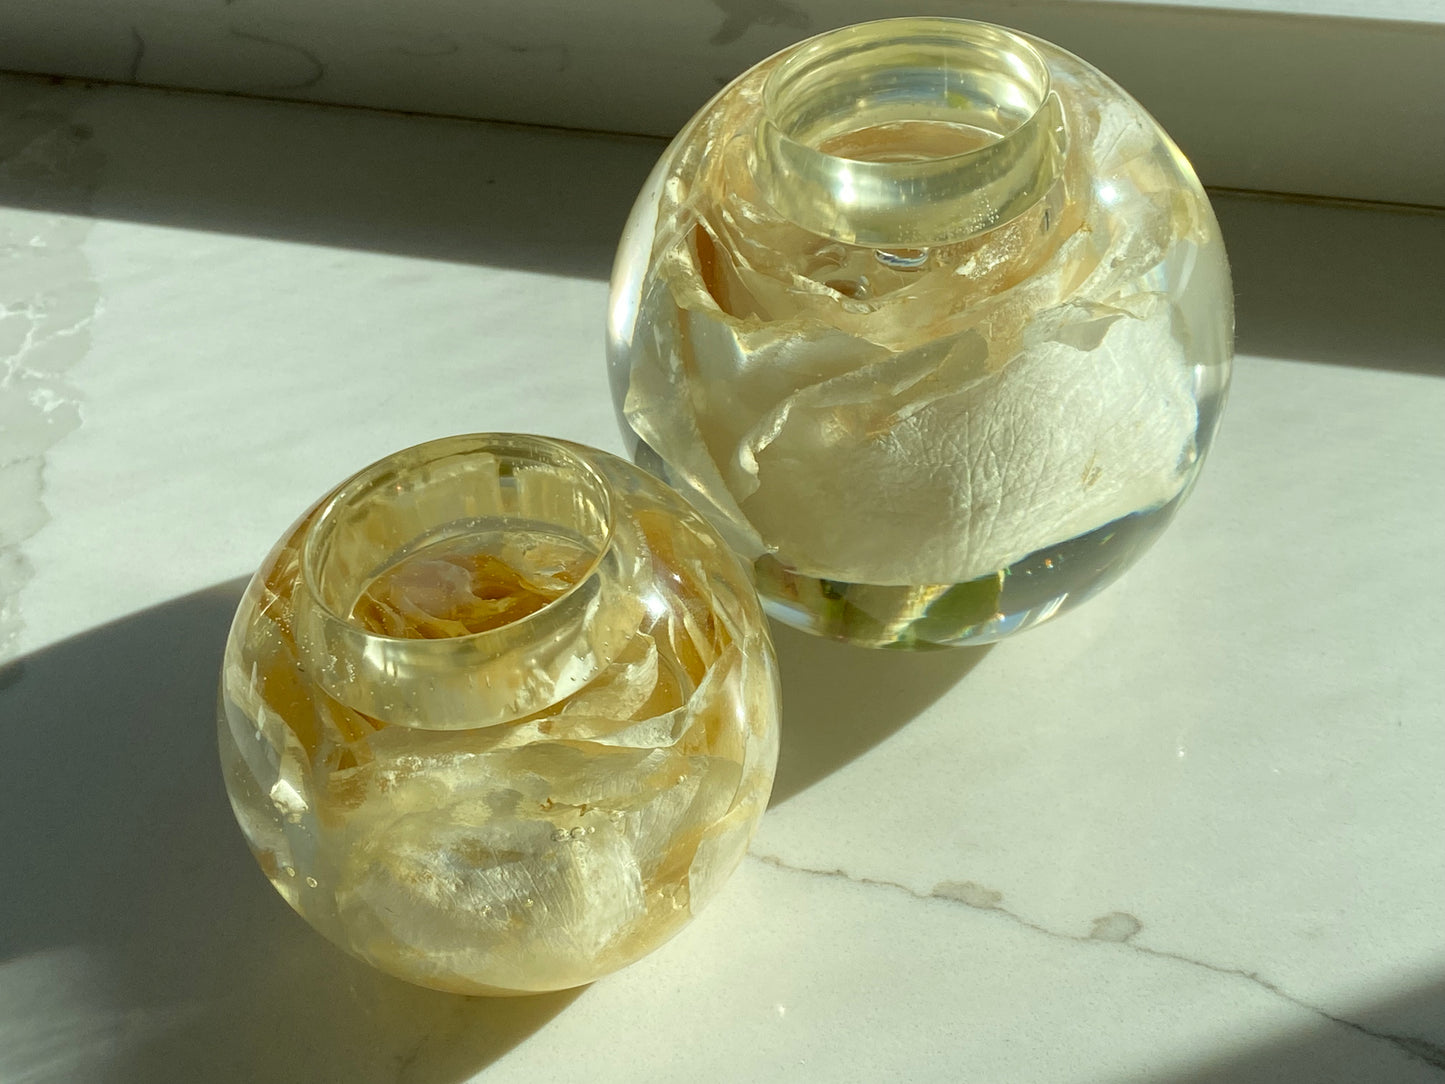 The Sphere Candle Holders